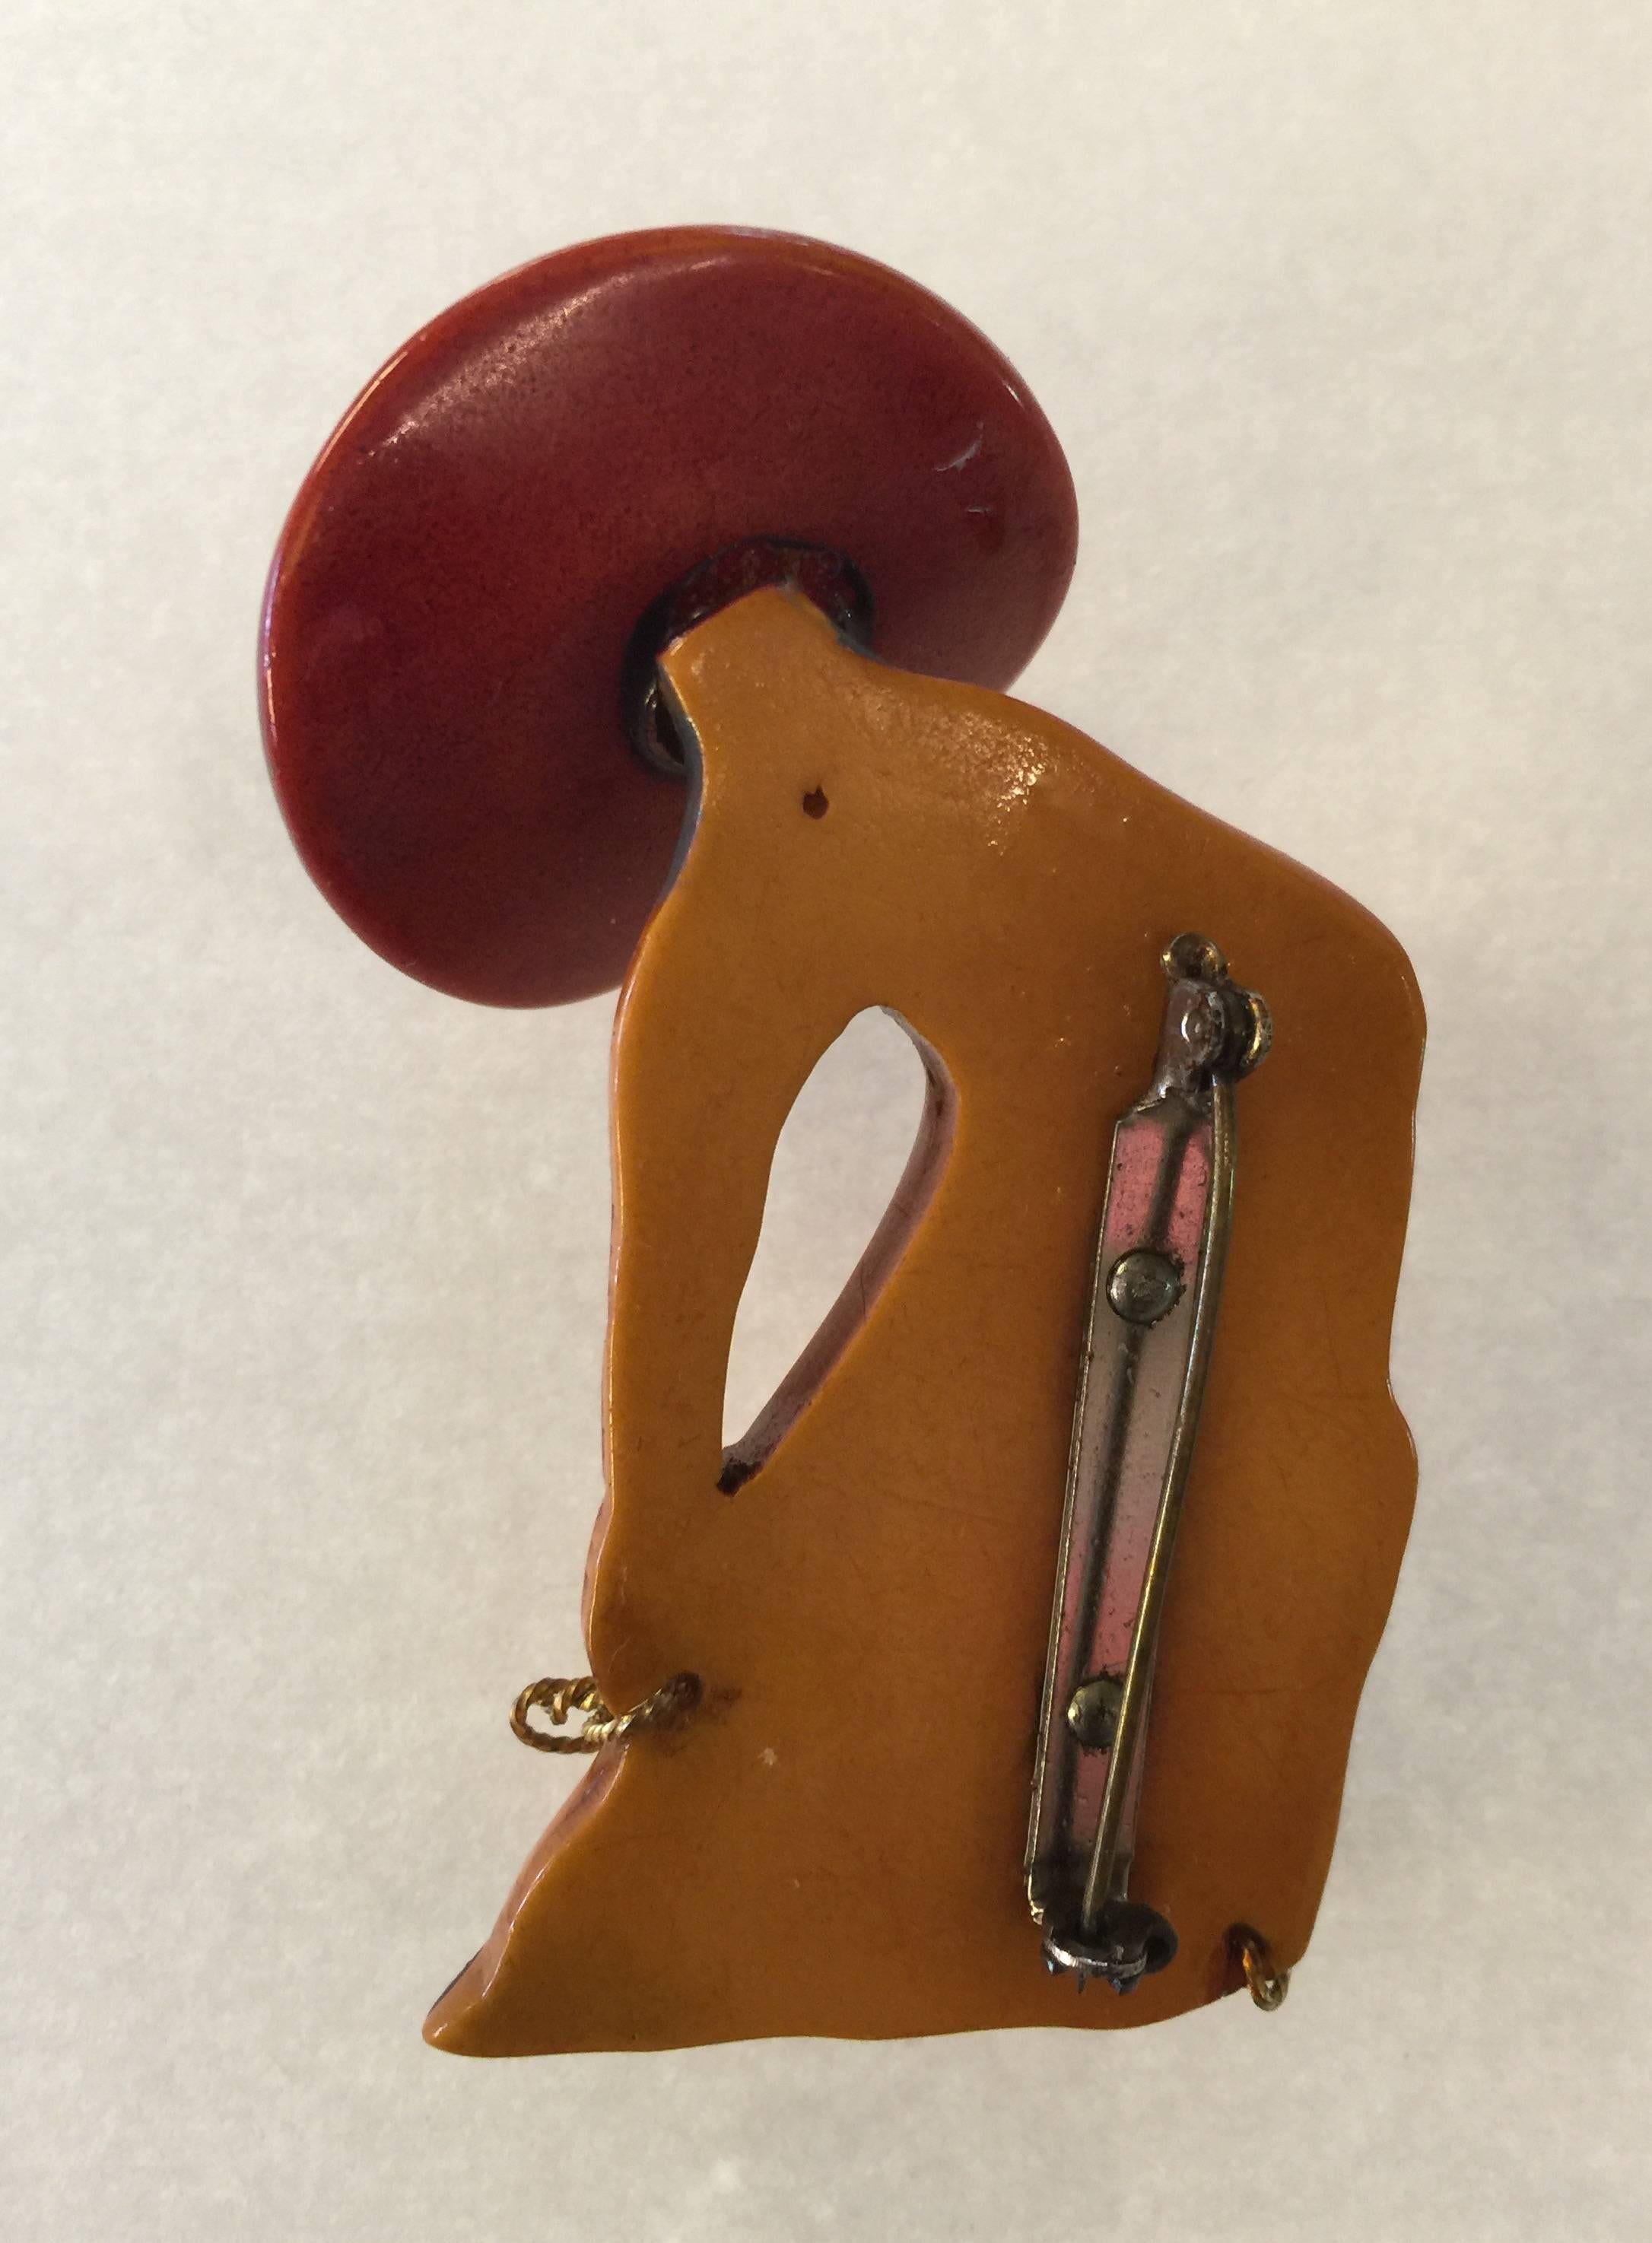 A beautiful and amusing bakelite cowboy pin with painted detail, resin washed large three-dimensional hat over face and brass coiled lariat detailing., The body of the cowboy is not resin washed but the hat is. 1930's Americana makes this bakelite